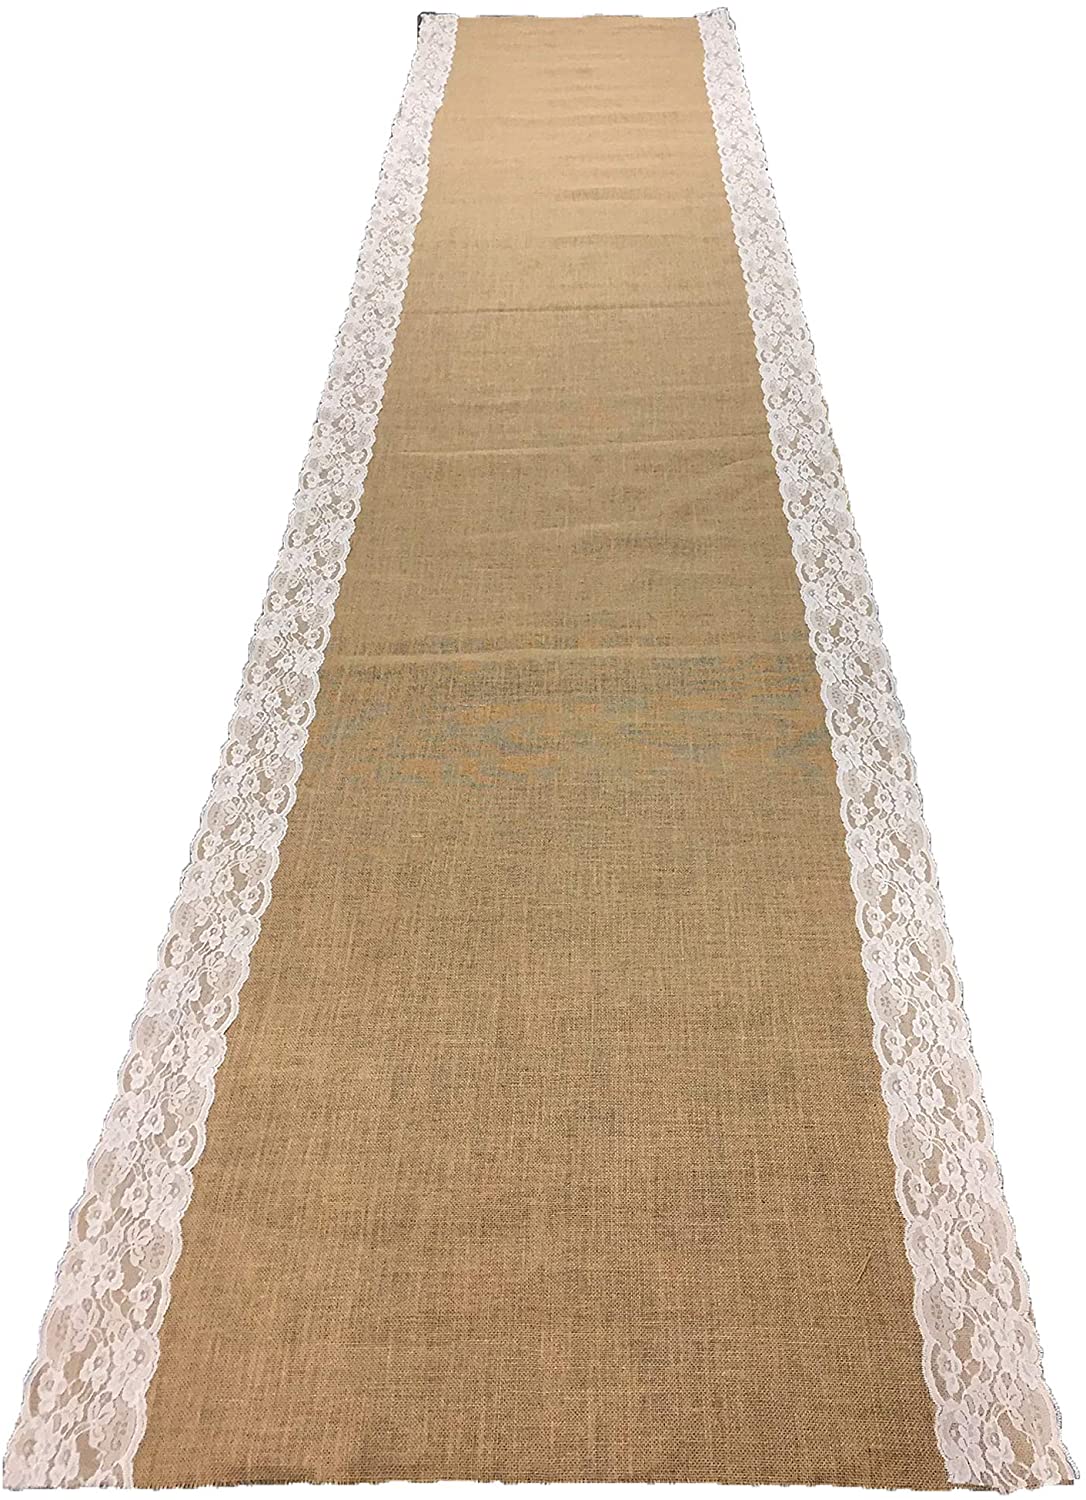 AAYU Brand Premium 40&quot; X 10-feet Burlap Outdoor Wedding Aisle Runner with Wide Ivory lace Attached Edges,10ft (40 inch x 10 Feet) Jutemill 